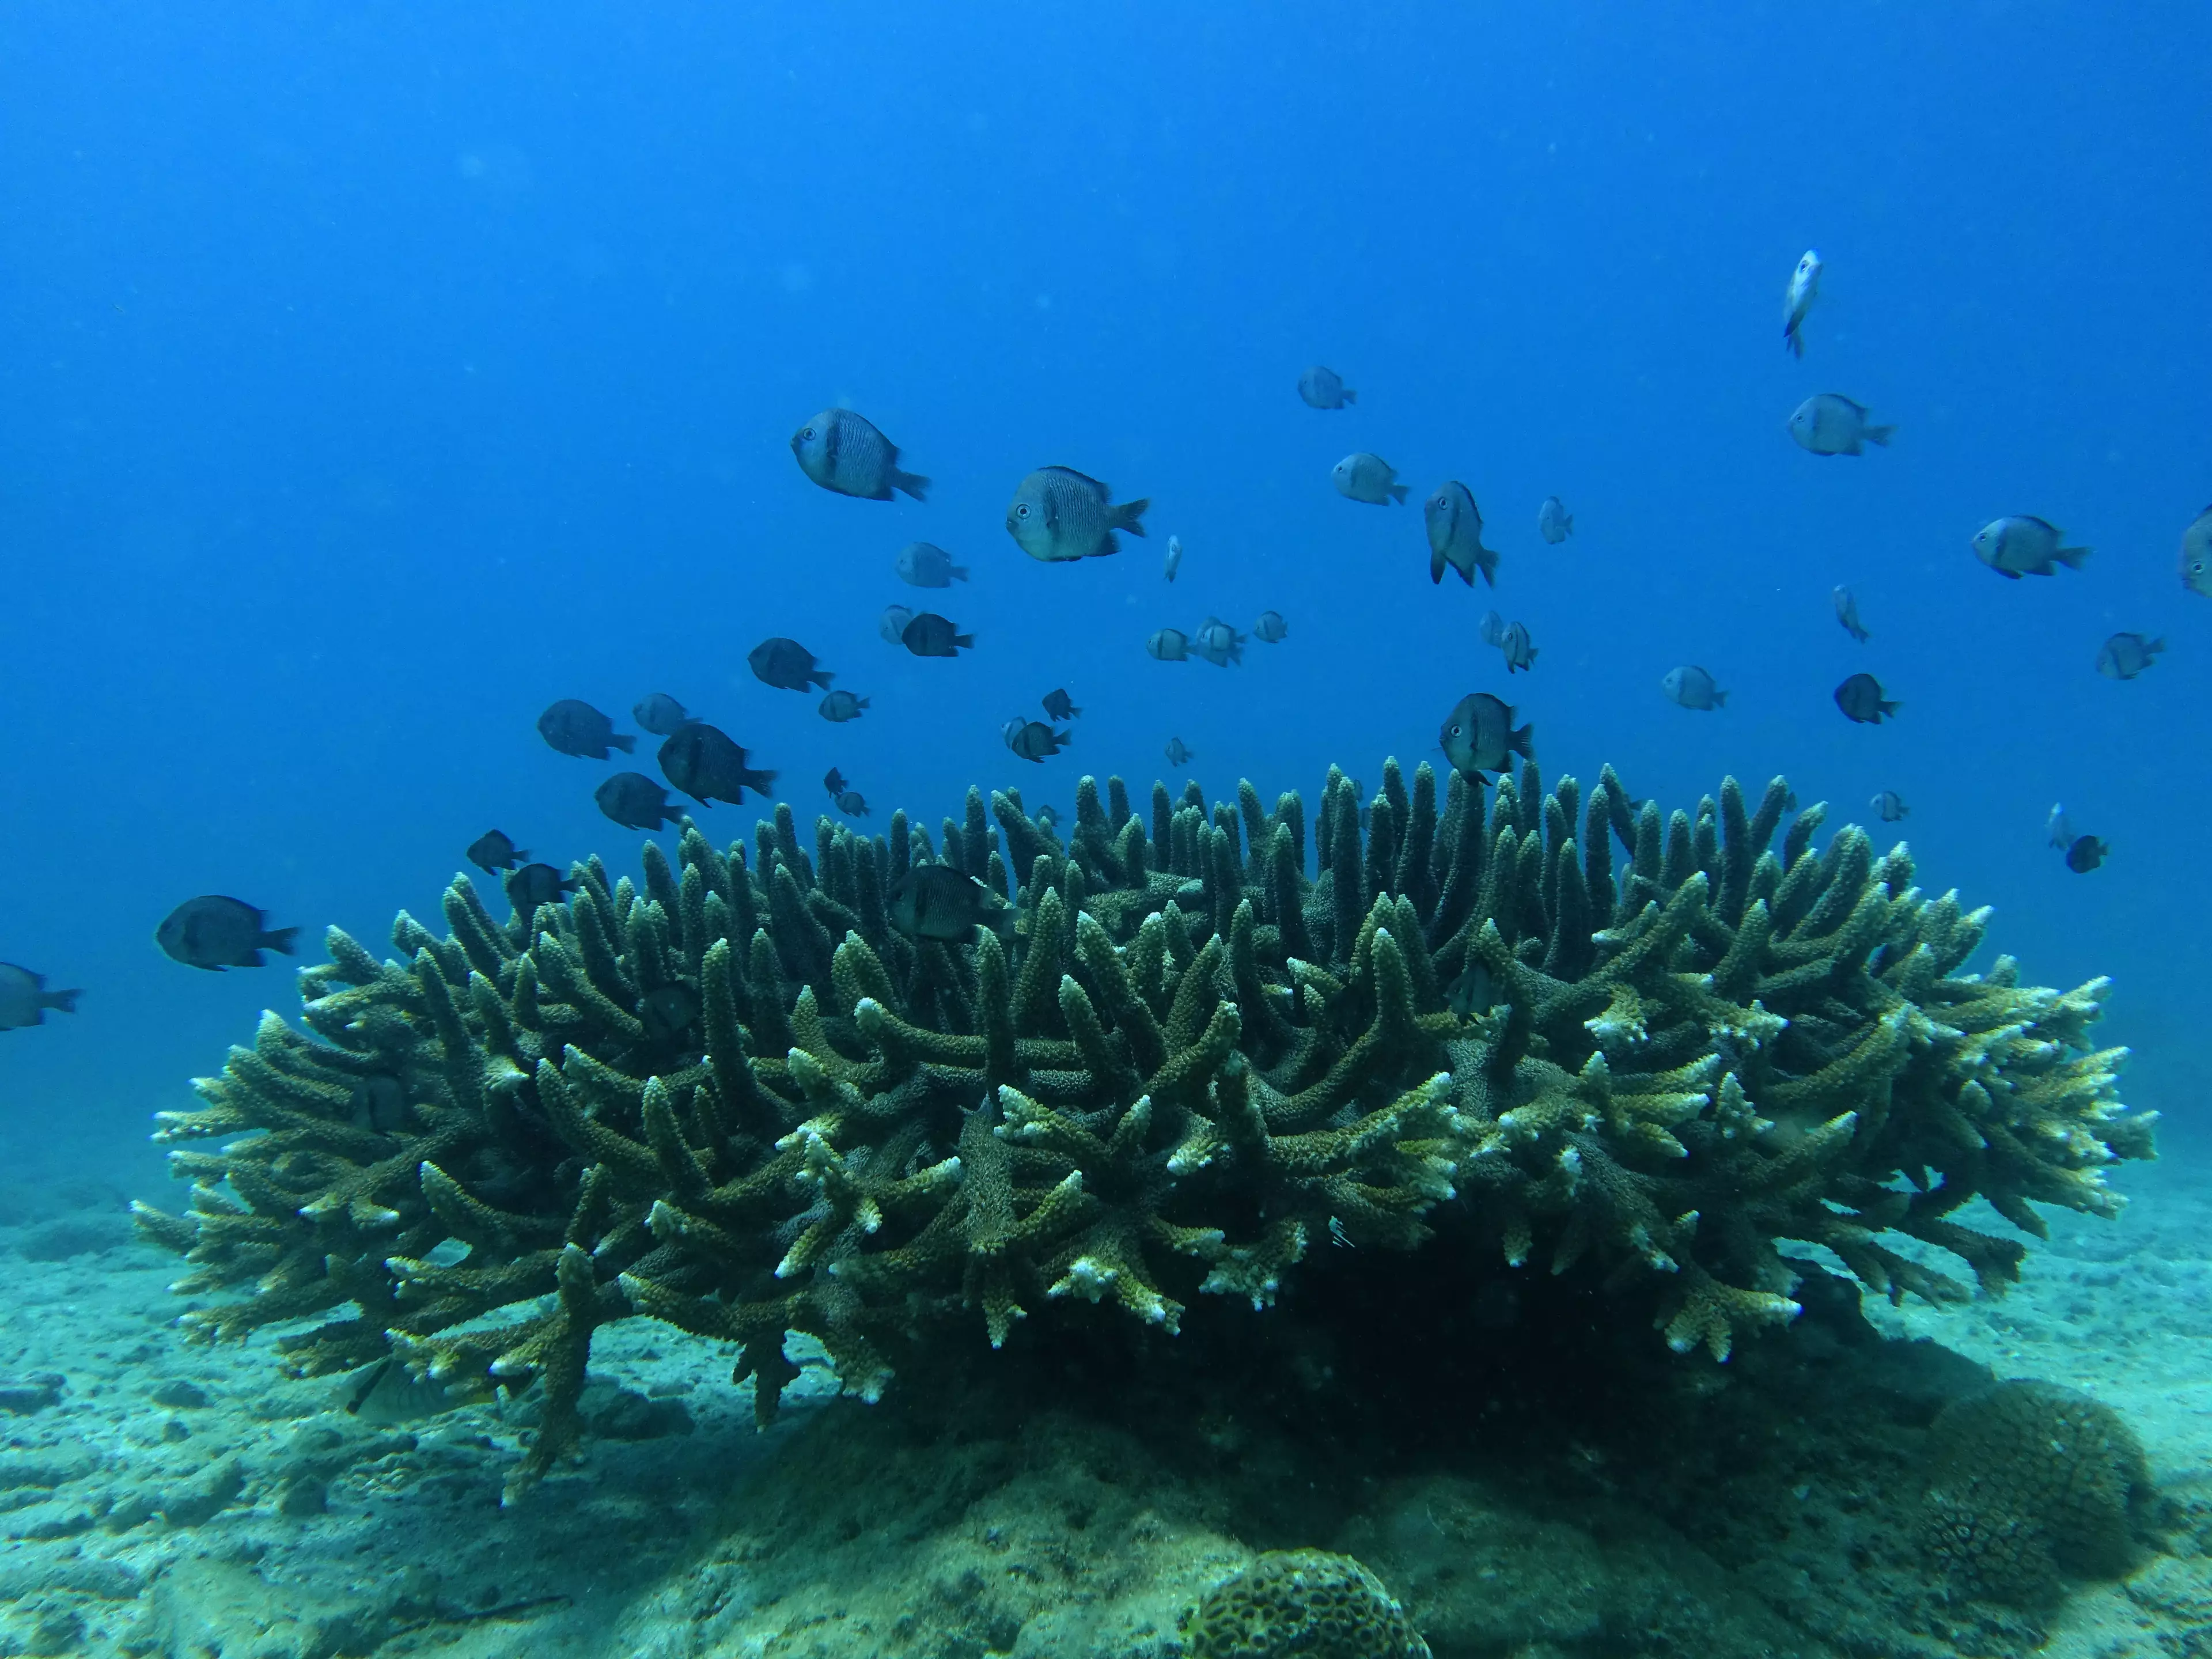 Coral reefs also face extinction, experts warn.